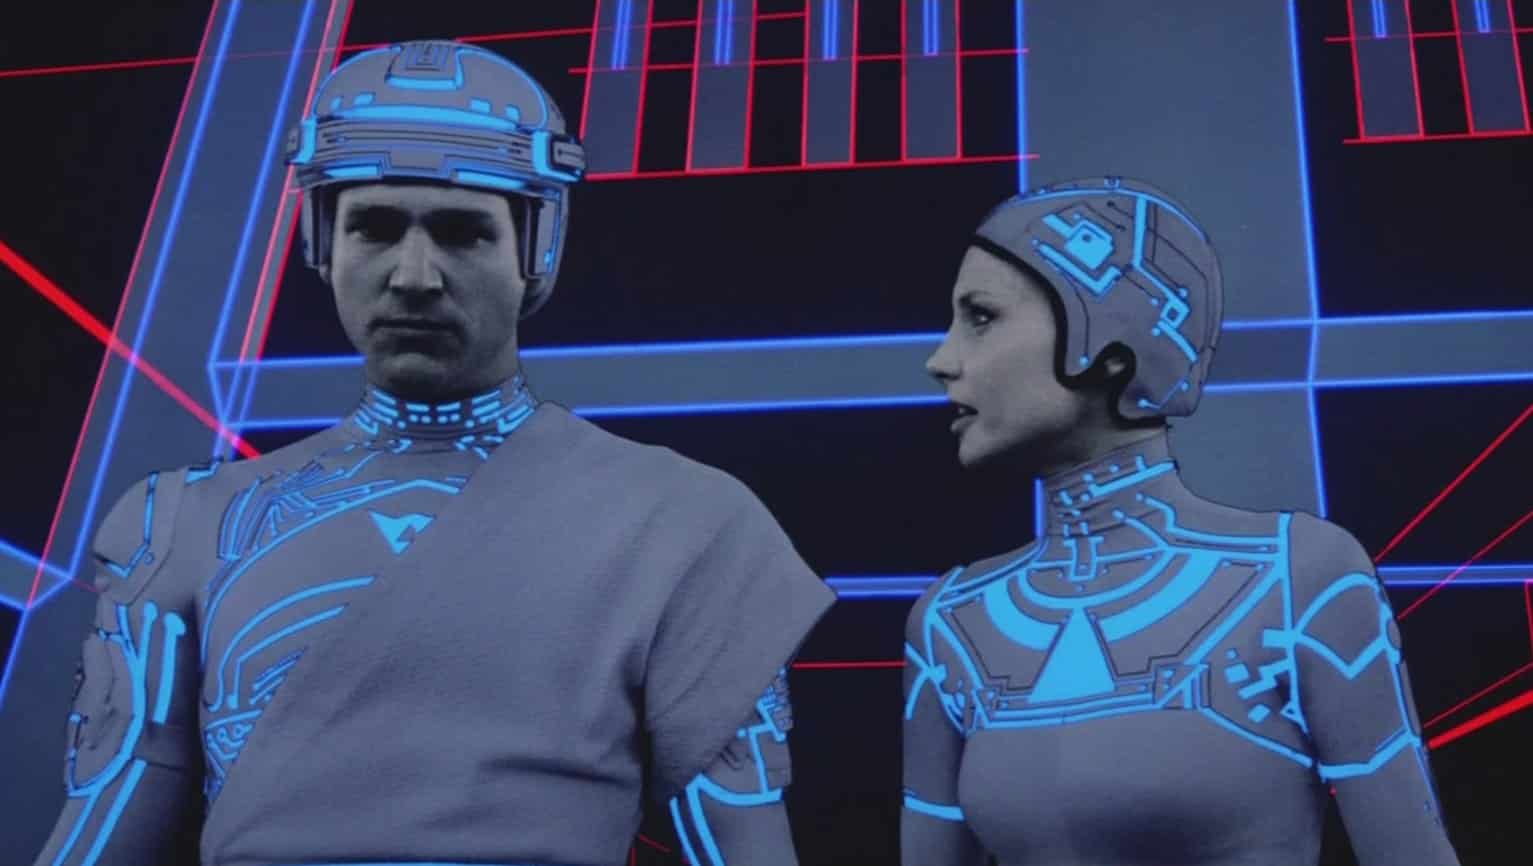 10 Best Movies About Artificial Intelligence That You Must Watch - 60